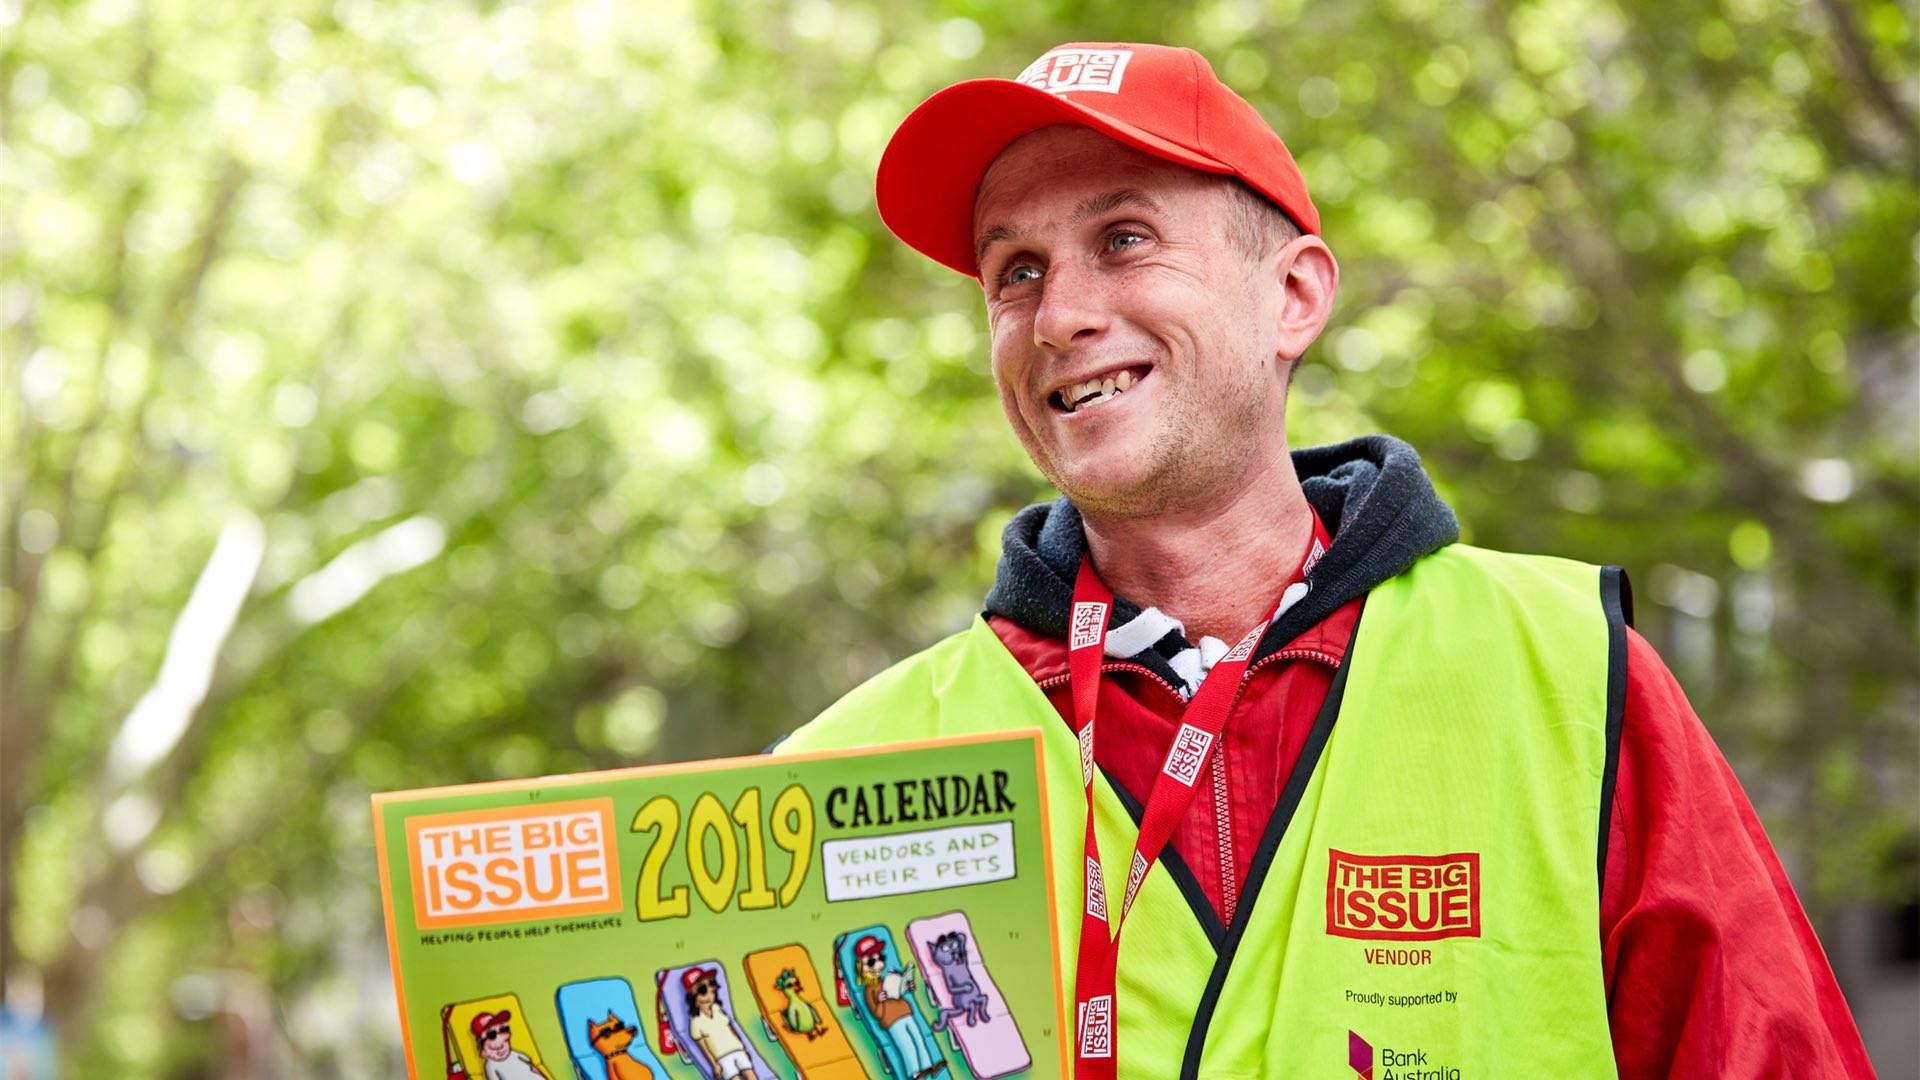 You Can Now Pay for Your Copy of 'The Big Issue' Simply by Tapping Your Card